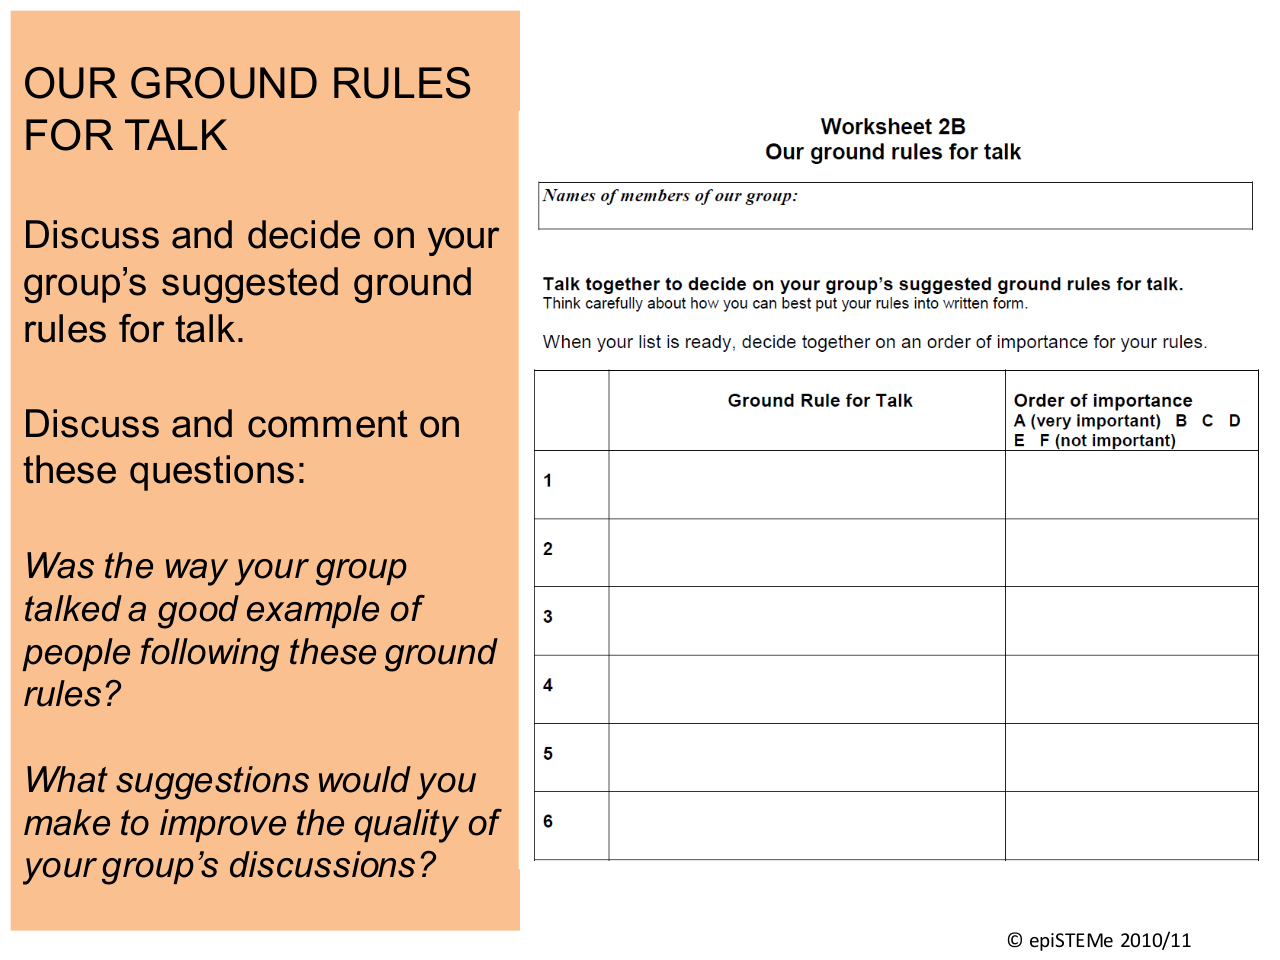 Our Ground Rules for Talk presentation slide. Groups are asked to discuss and decide on ground rules for talk, and a worksheet to fill in is provided.